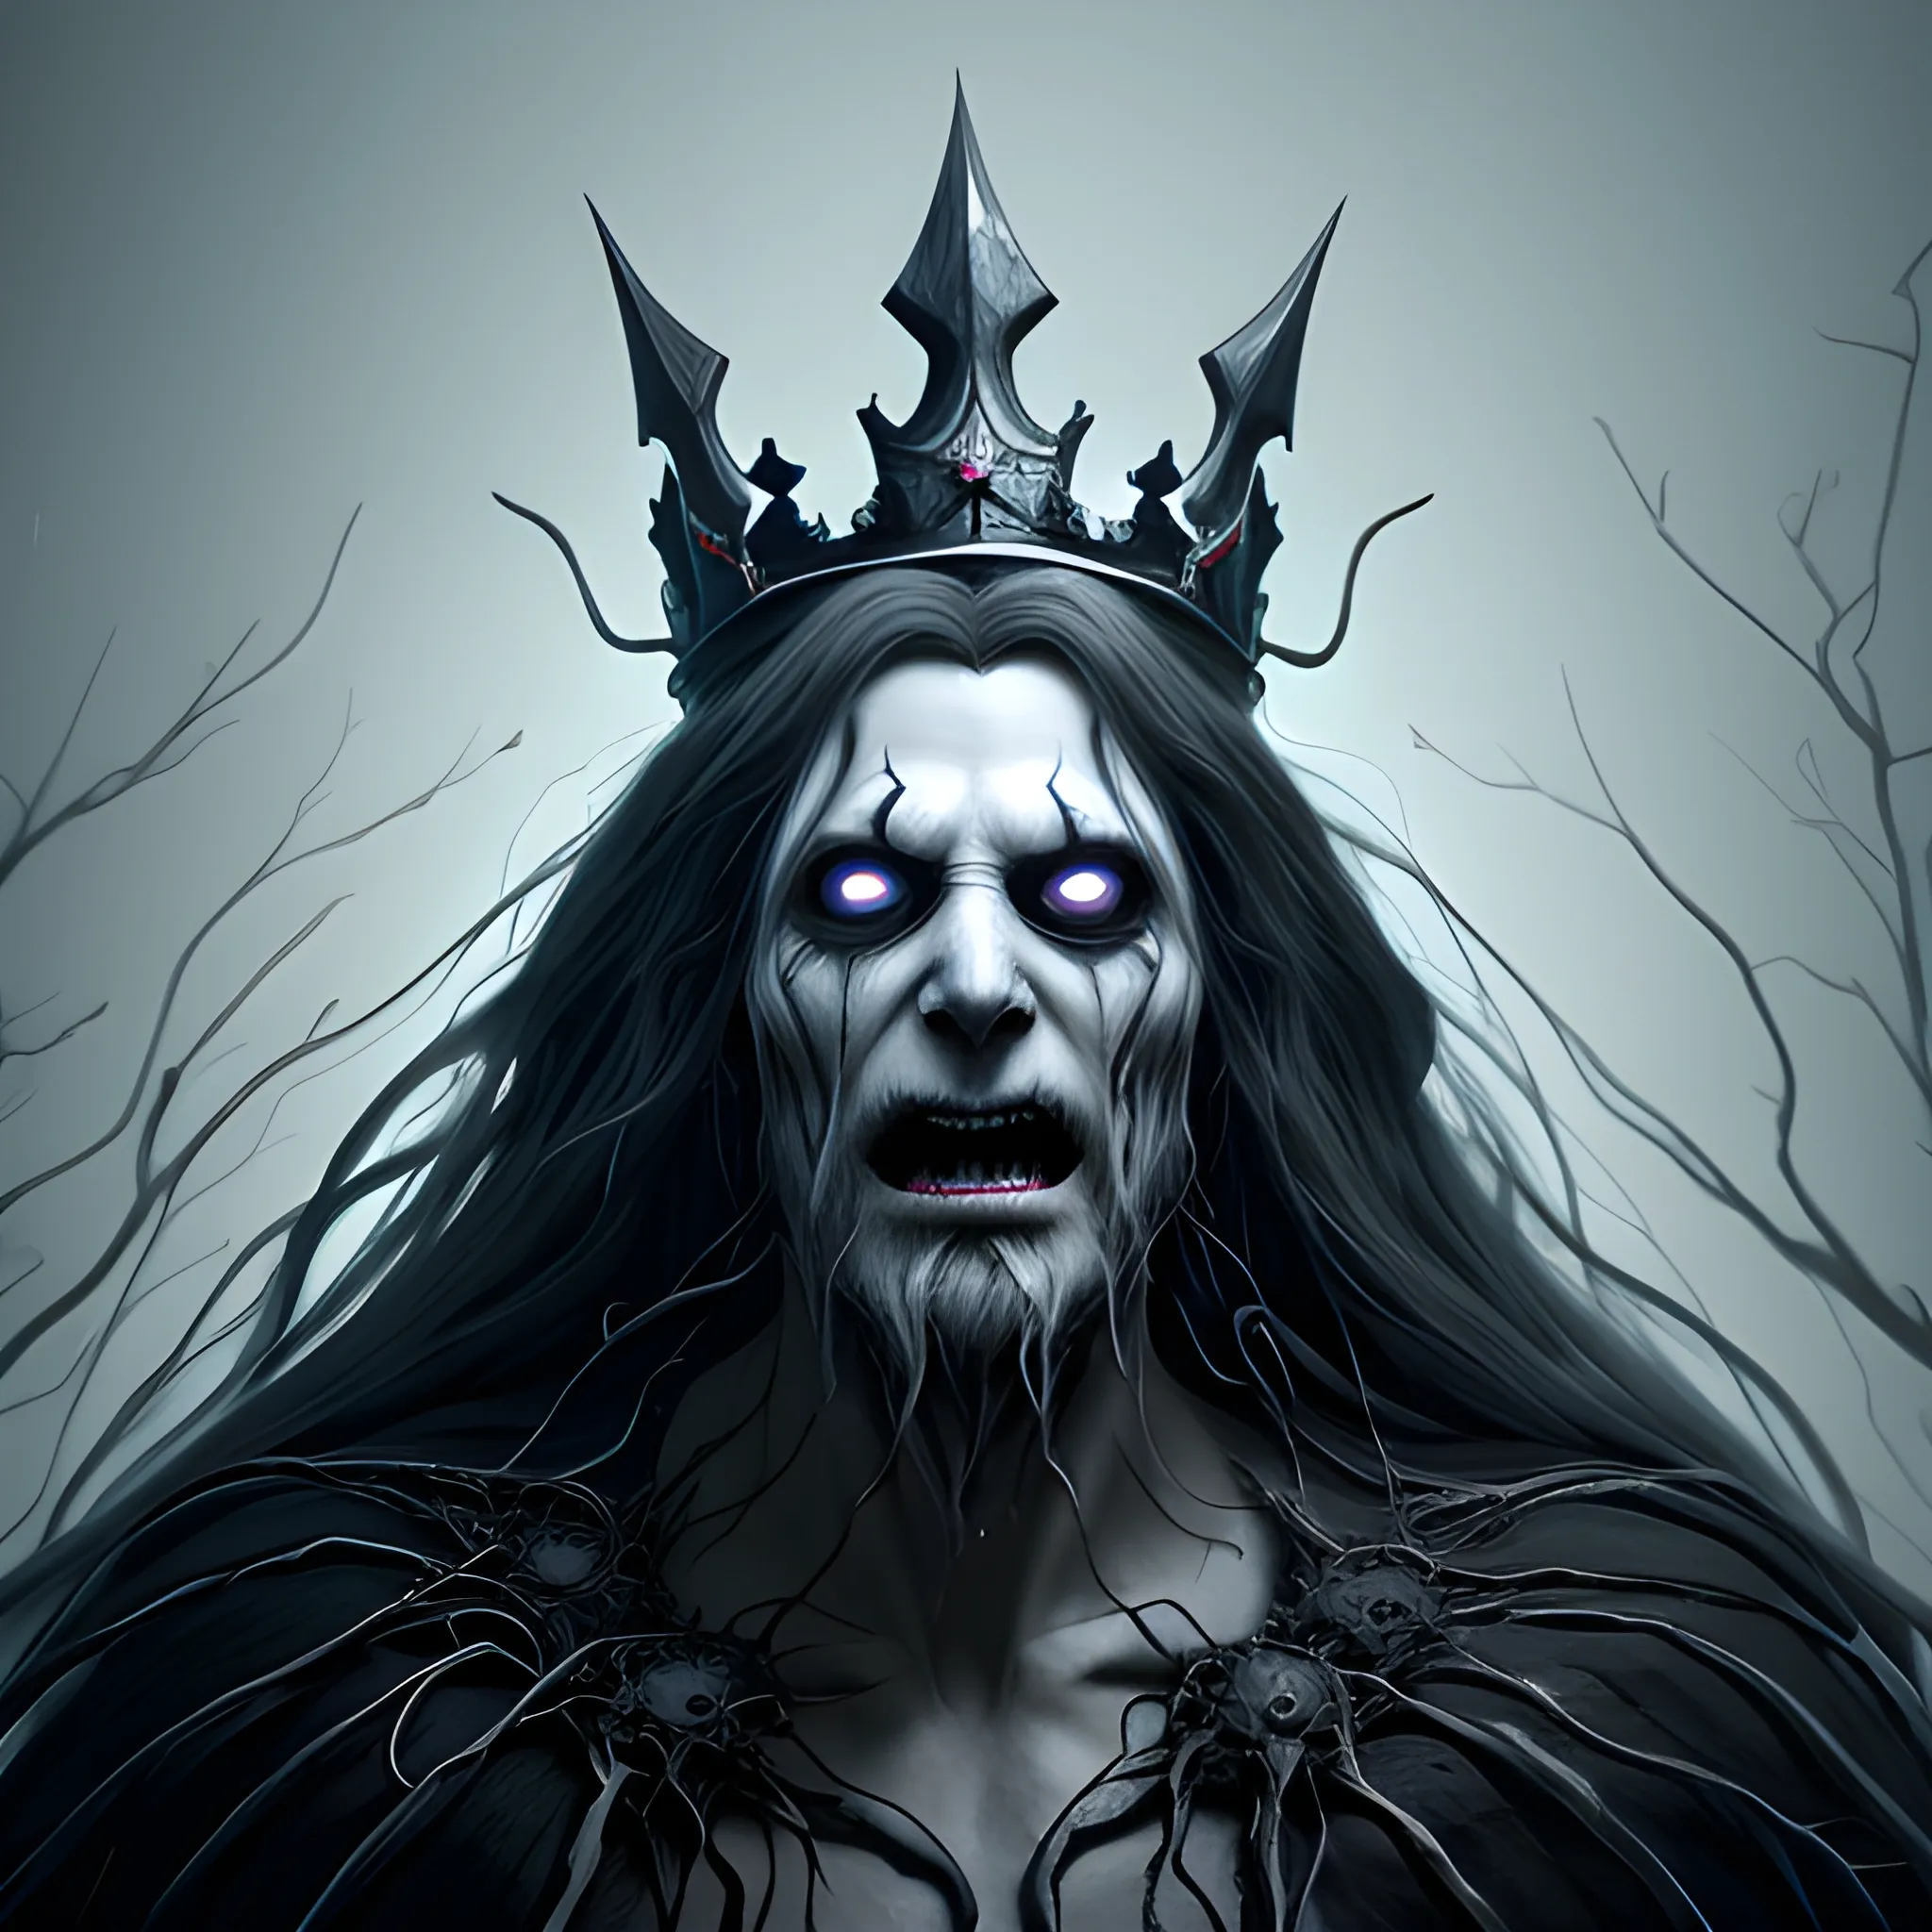 un-natural thin but tall Ghost King with a black pointed crown, long white hair, a creepy screaming face , transparent ghost, surrounded with black lightning, 8k, high resolution, high quality, photorealistic, hyper-realistic, detailed, detailed matte painting, deep colour, fantastical, intricate detail, splash screen, complementary colours, fantasy concept art, 8k resolution trending on Artstation Unreal Engine 5

